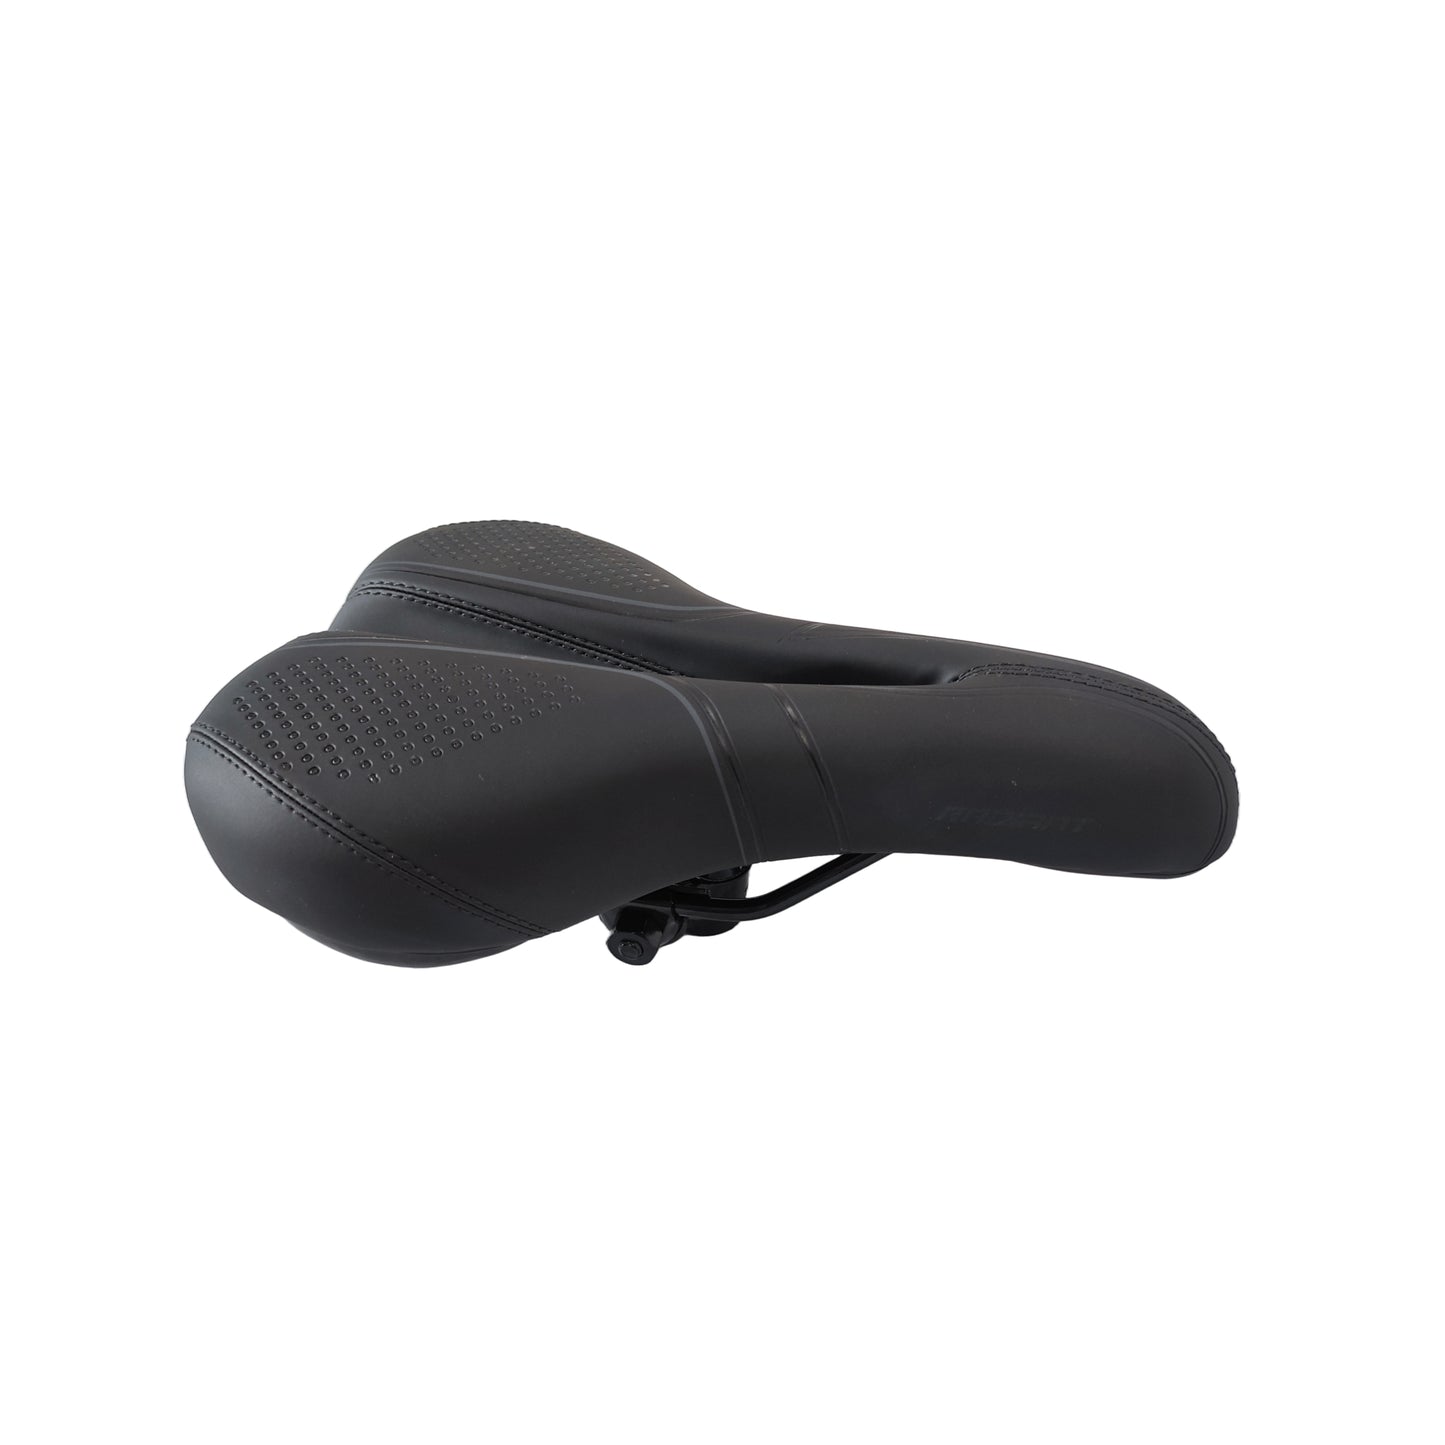 Bicycle saddle with hole spare part for mtb and hybrid cycle by omobikes side view